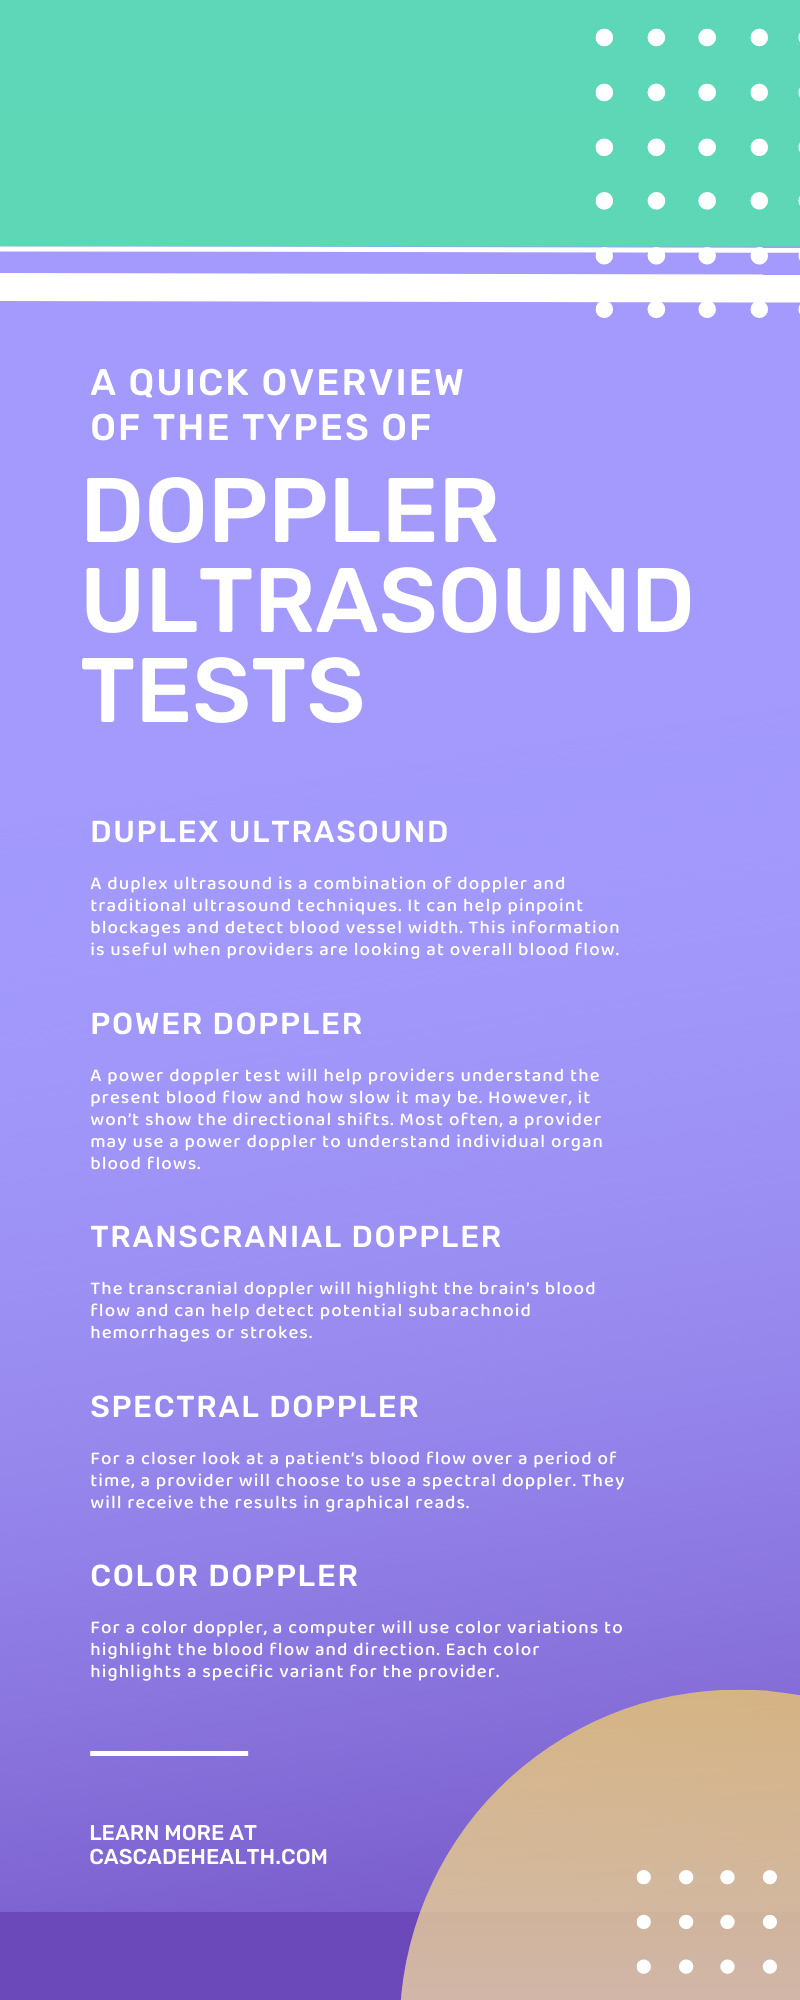 A Quick Overview of the Types of Doppler Ultrasound Tests